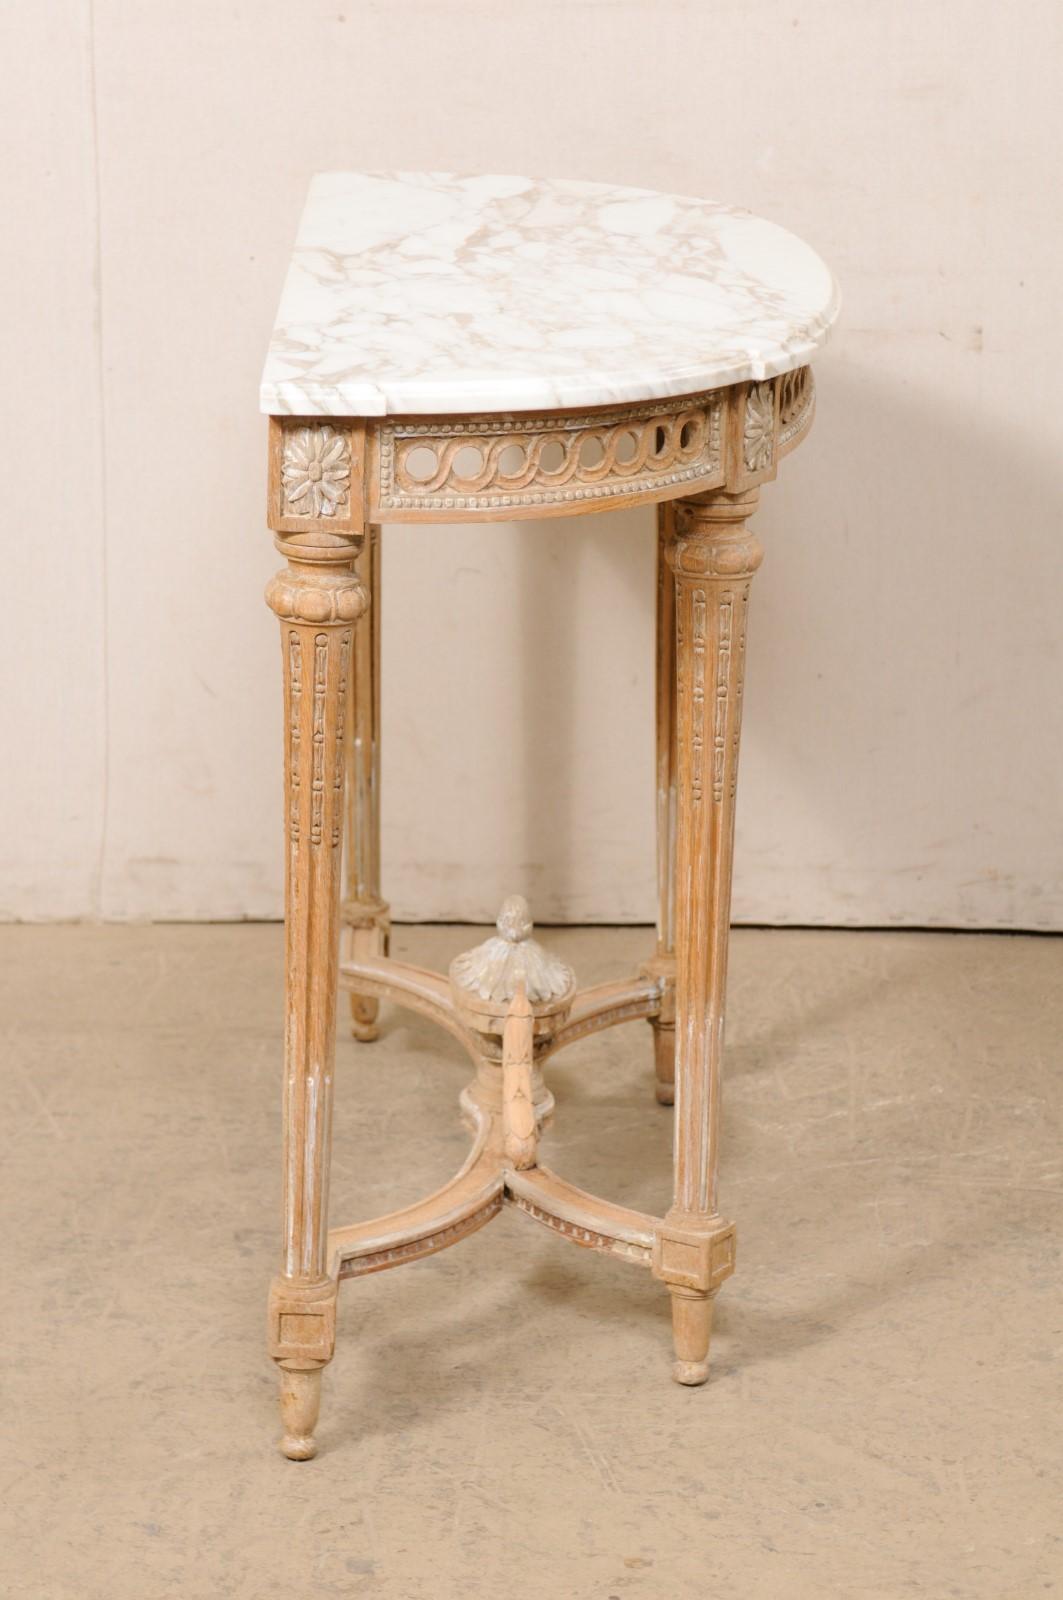 French Neoclassic Style Marble-Top Console Table W/Nice Urn Finial at Underside For Sale 1